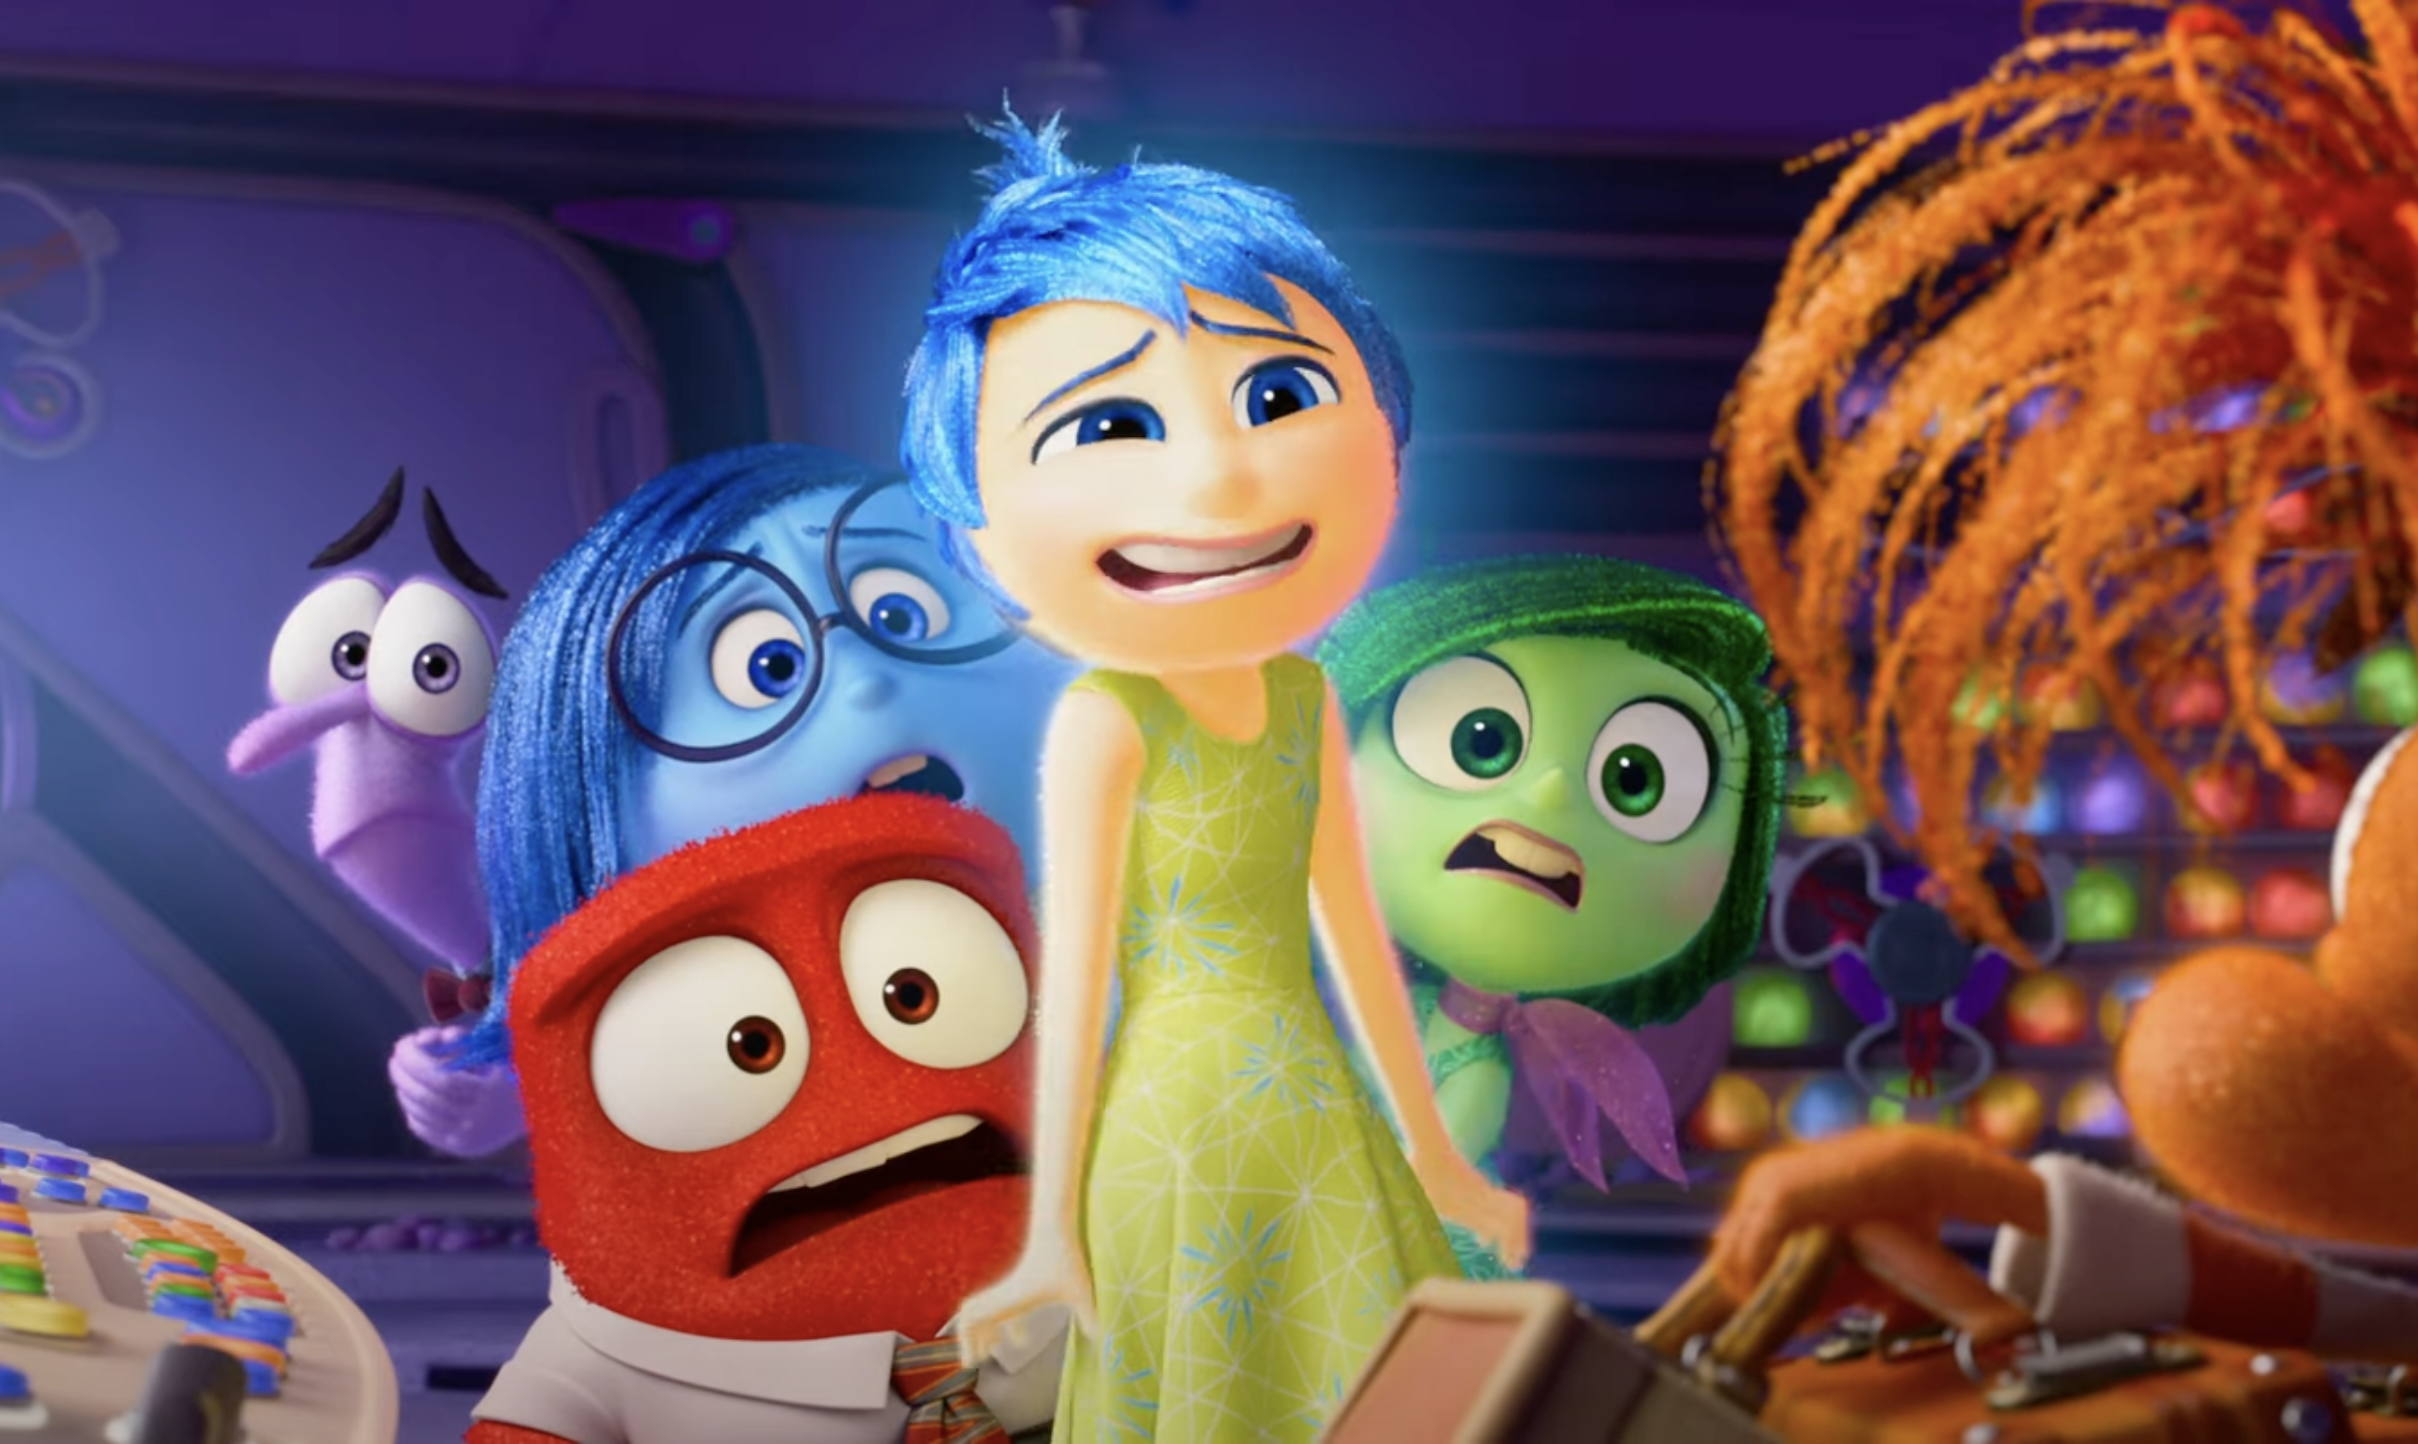 What to Know About Inside Out 2 and Its Disney+ Release Plans